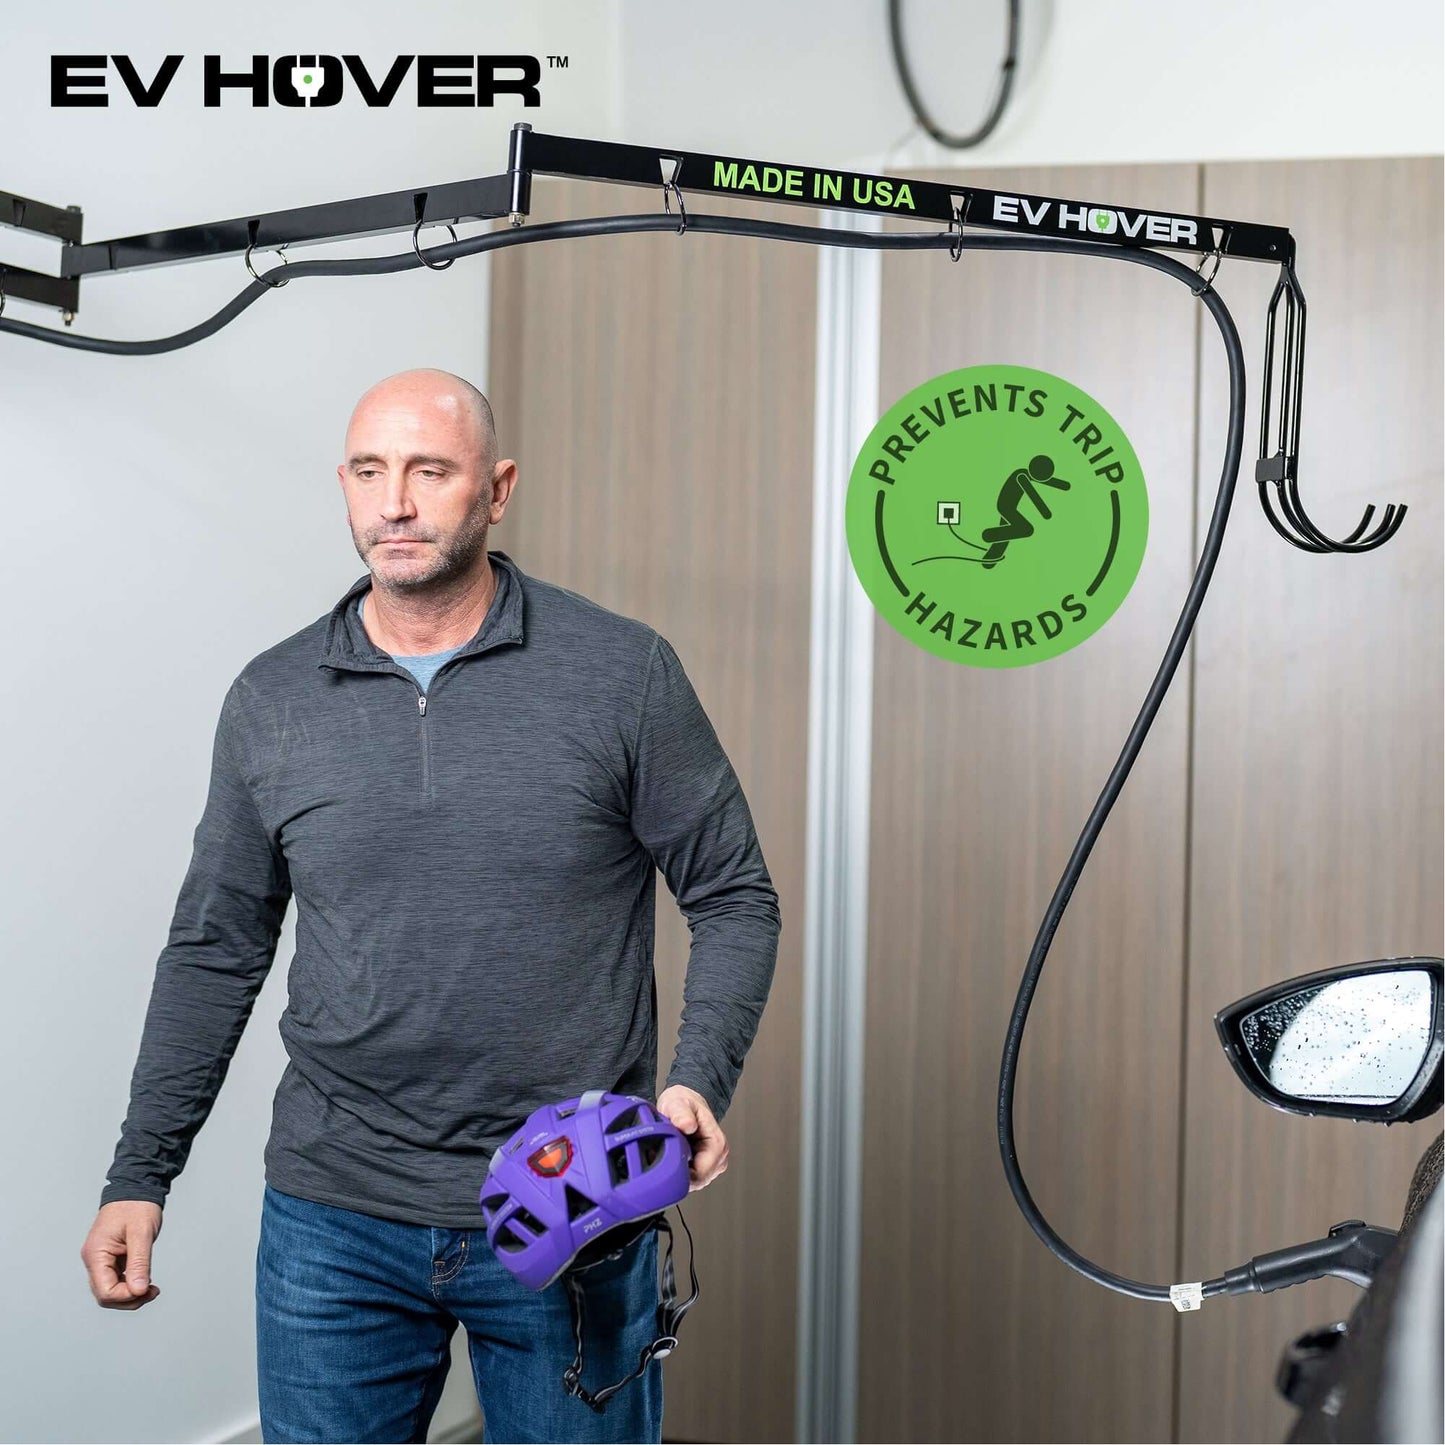 EV Hover prevents trip hazards from your electric vehicle charger cable